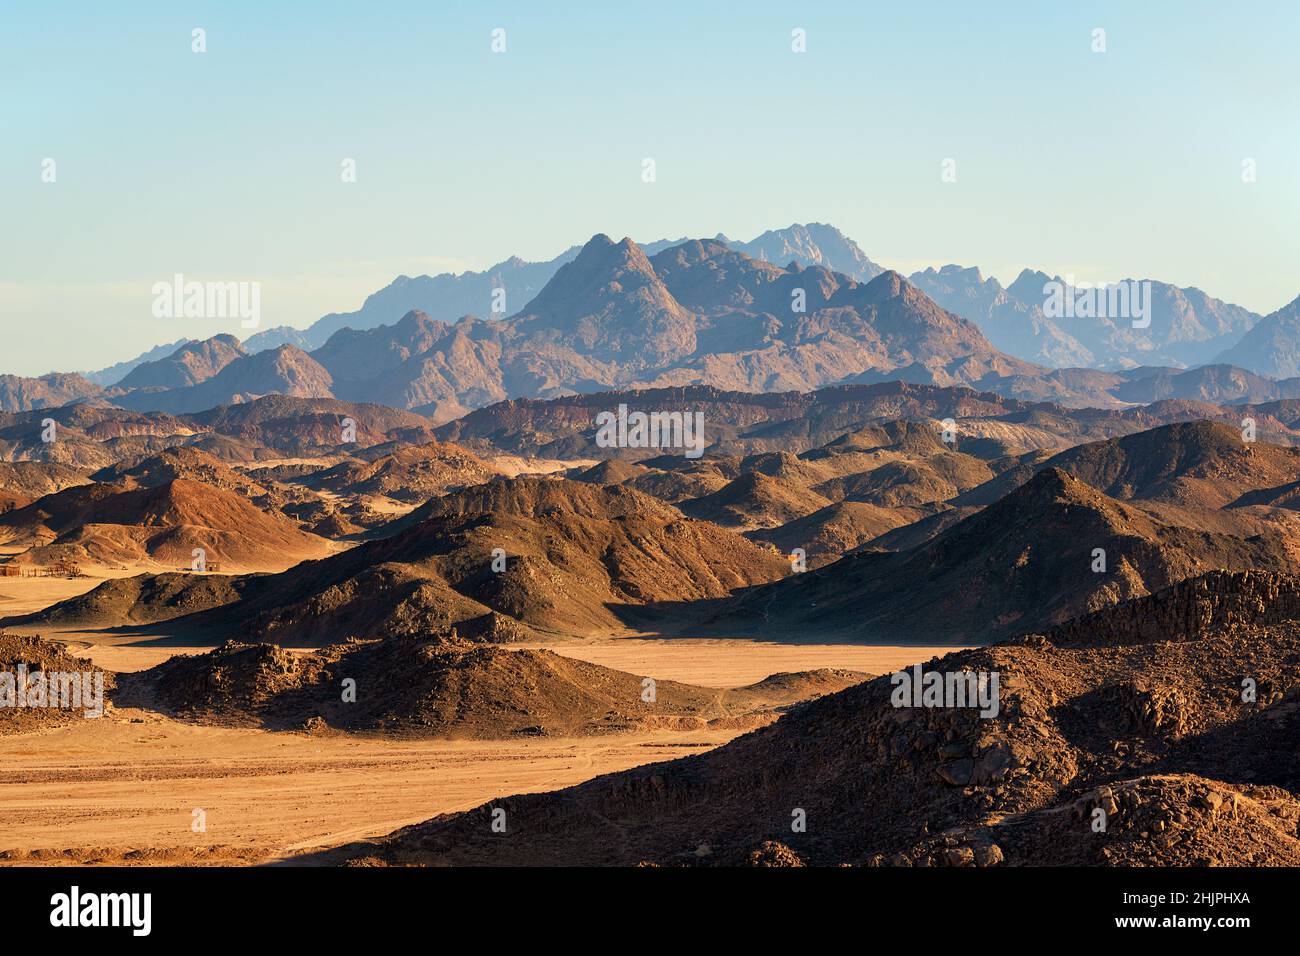 Eastern desert in Egypt with mountains and sand. Evening landscape looking like martian terrain simulation Stock Photo